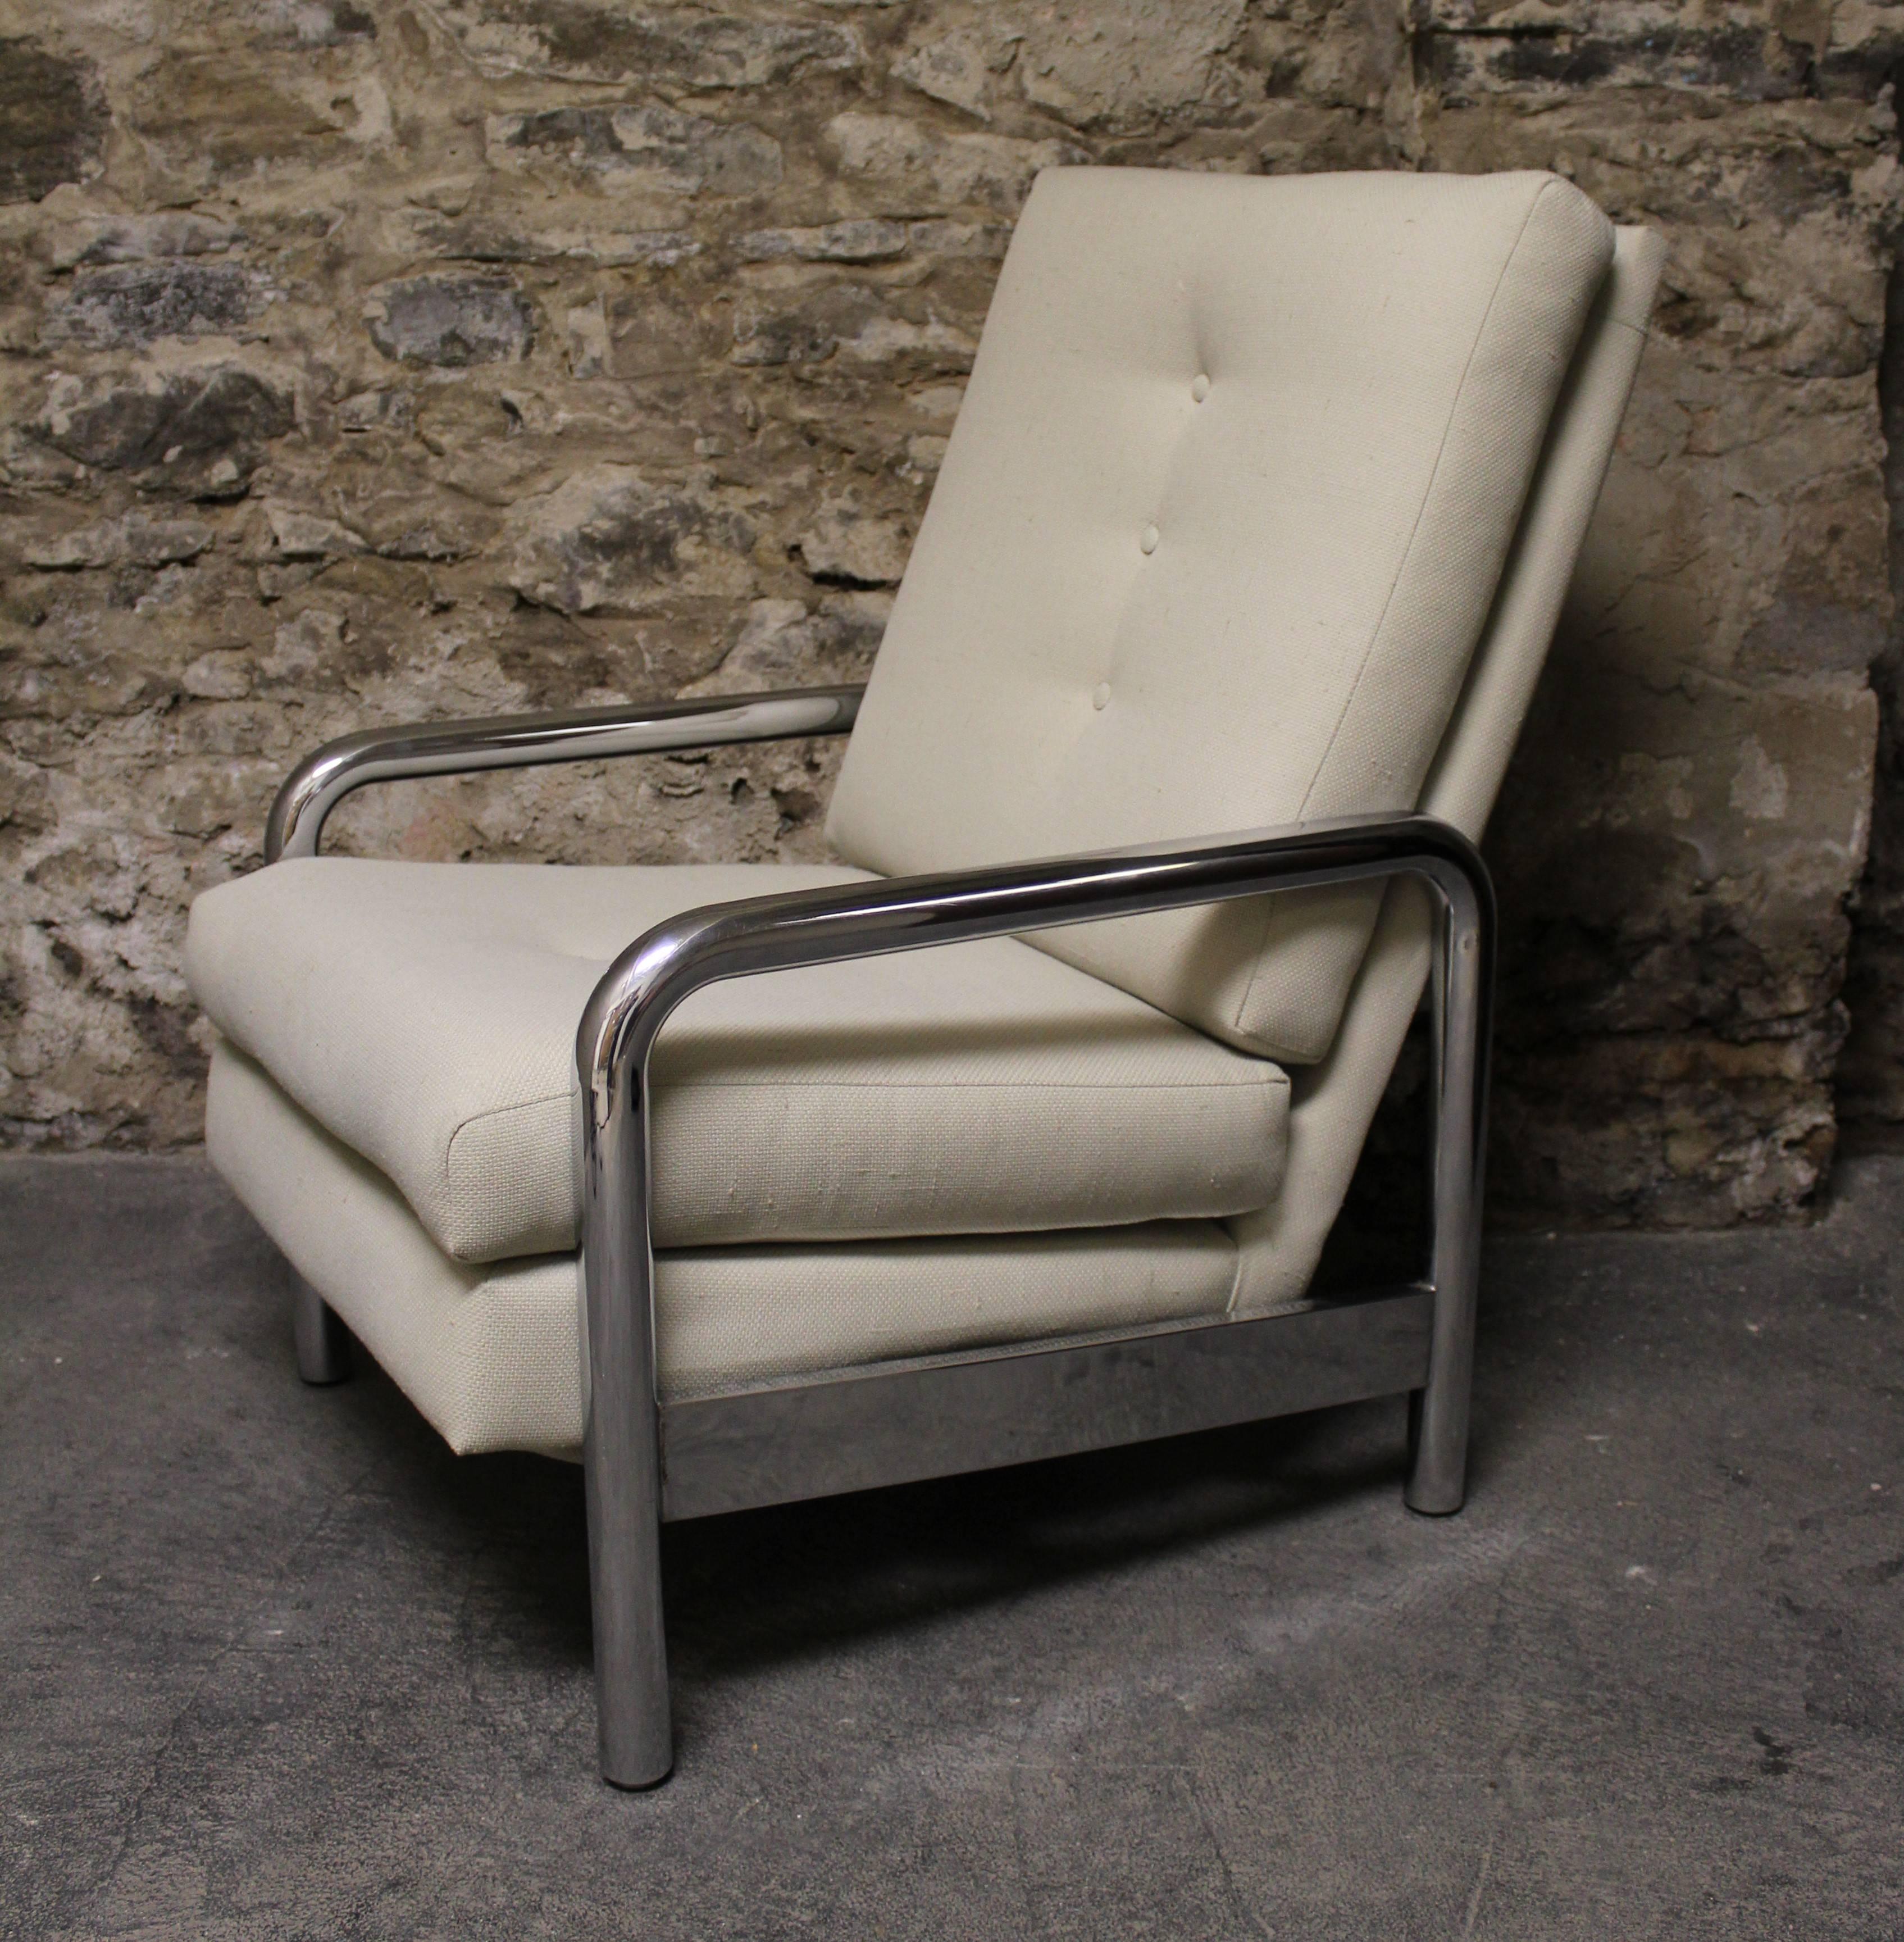 This vintage chromed tubular lounge chair has been designed by Milo Baughman for Thayer Coggin. It reclines to three different positions and the feet are adjustable It has been re-upholstered in a beautiful off-white fabric.